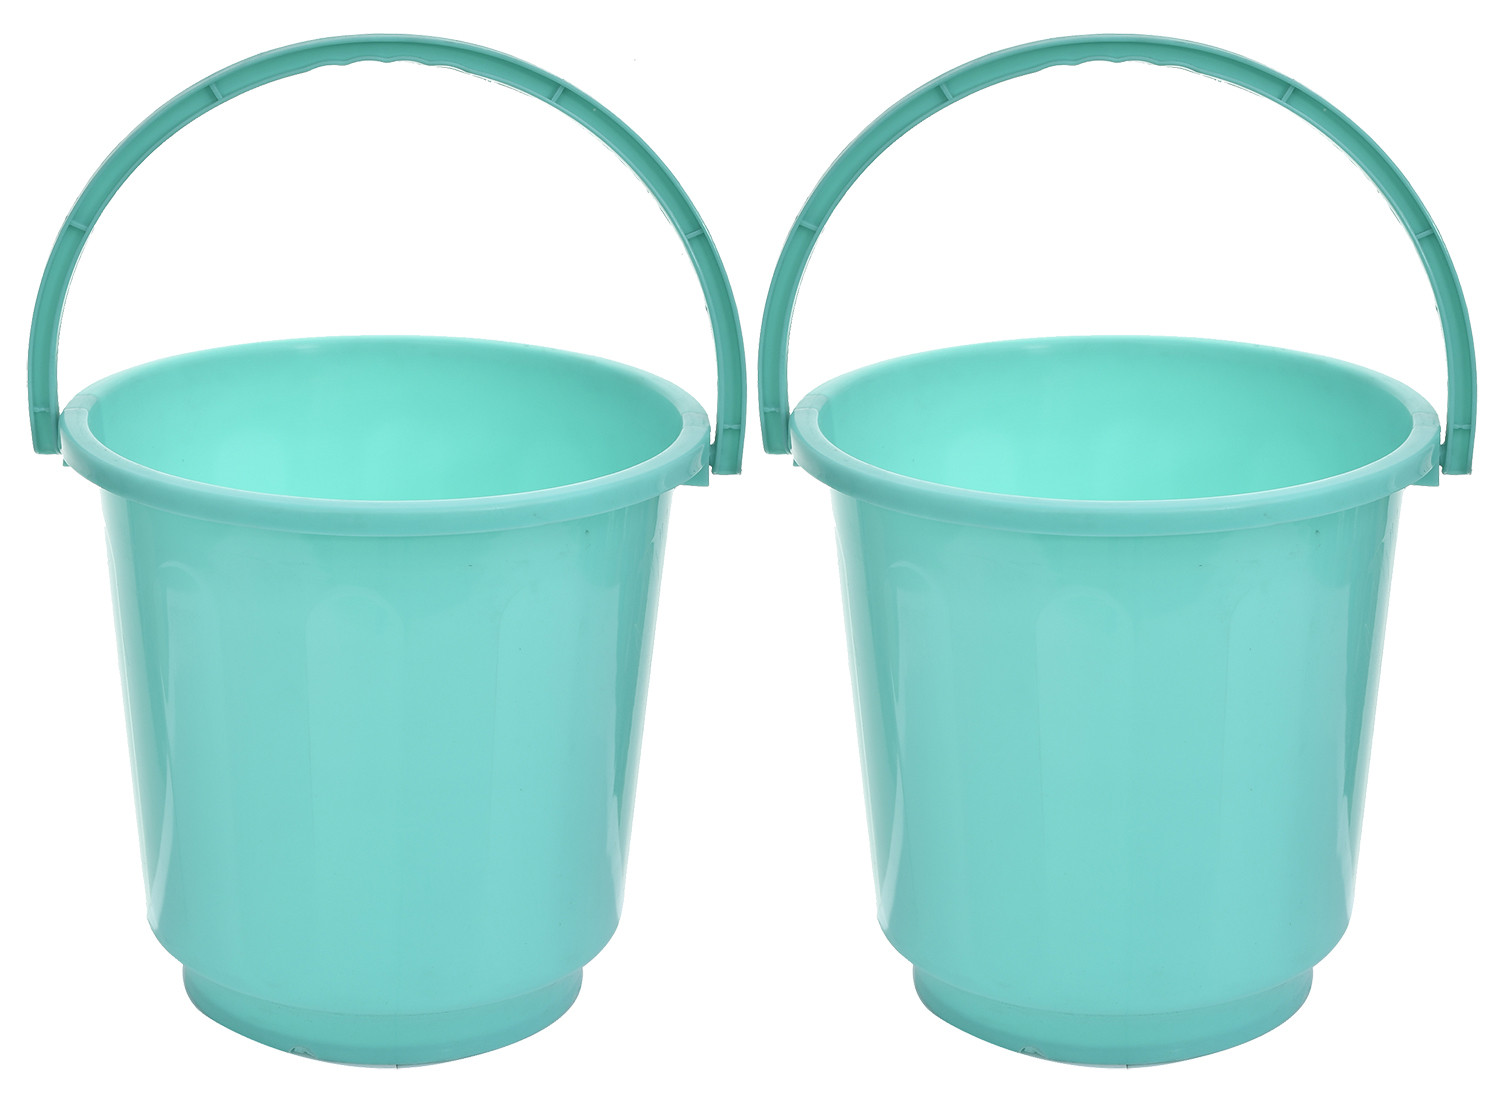 Kuber Industries Multipurposes Plastic Bucket For Bathing Home Cleaning & Storage Purpose With Lid, 16Ltr. (Green)-47KM01177